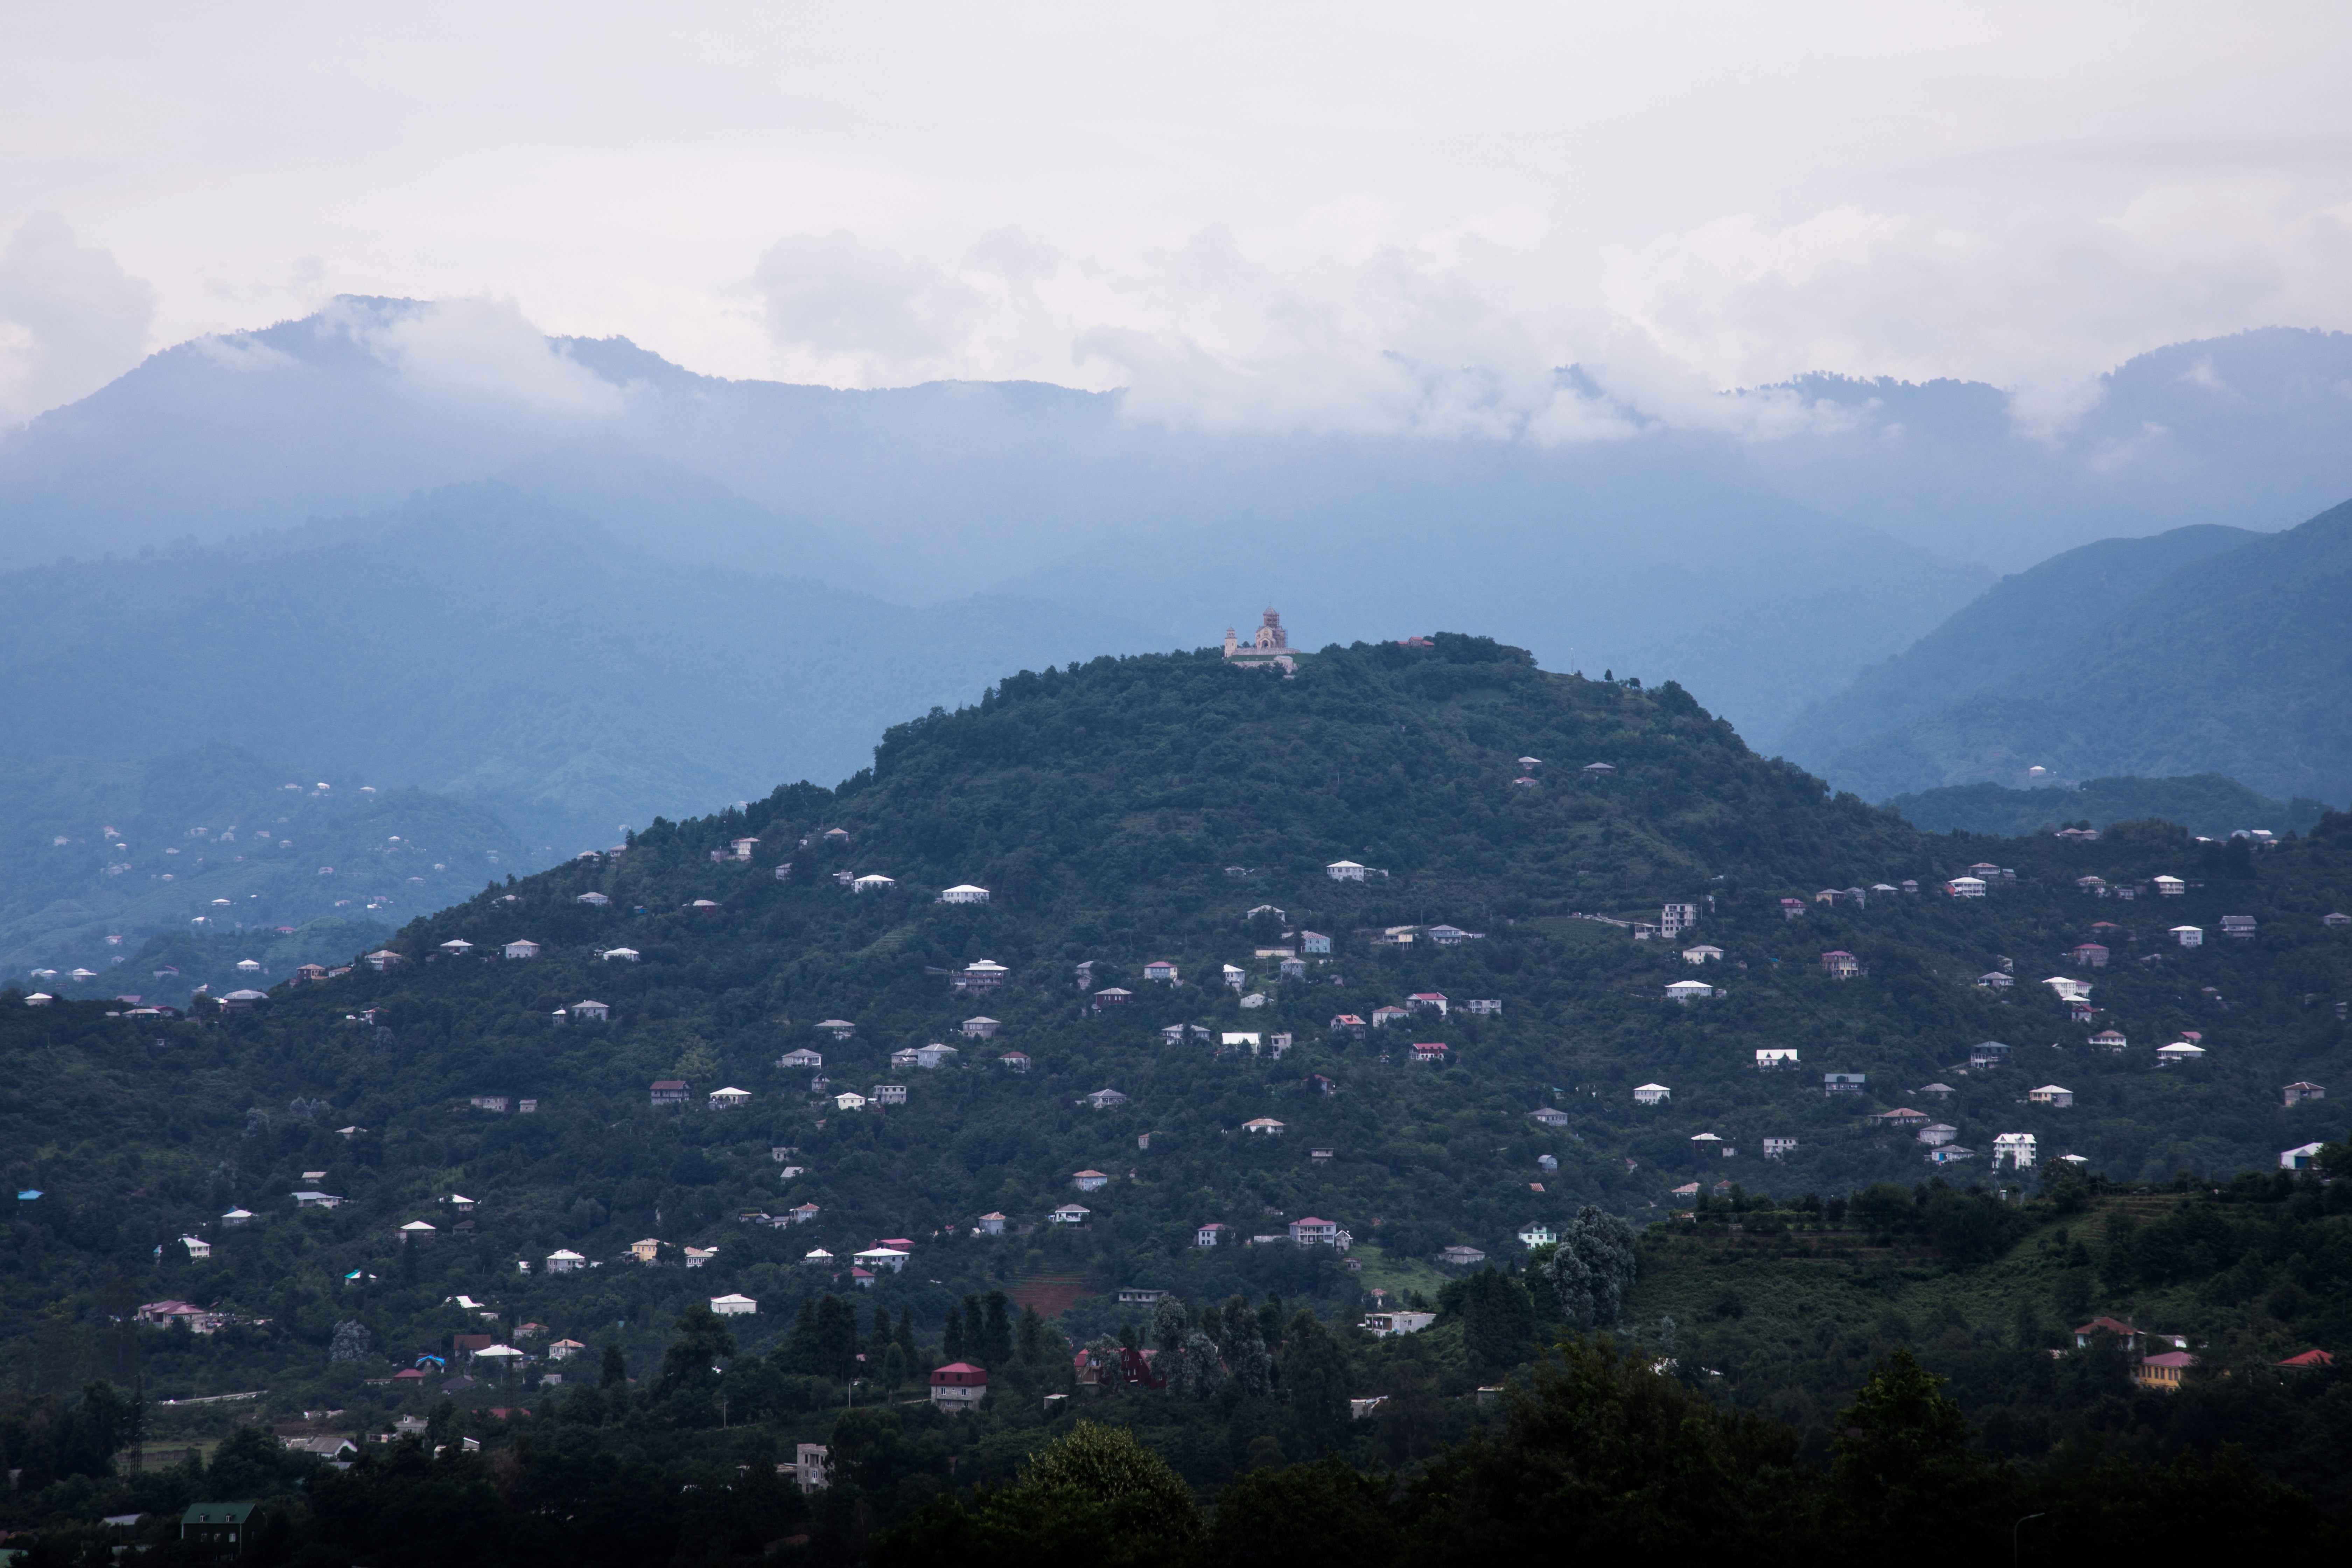 Panorama view of Batumi mountains and church on the hill